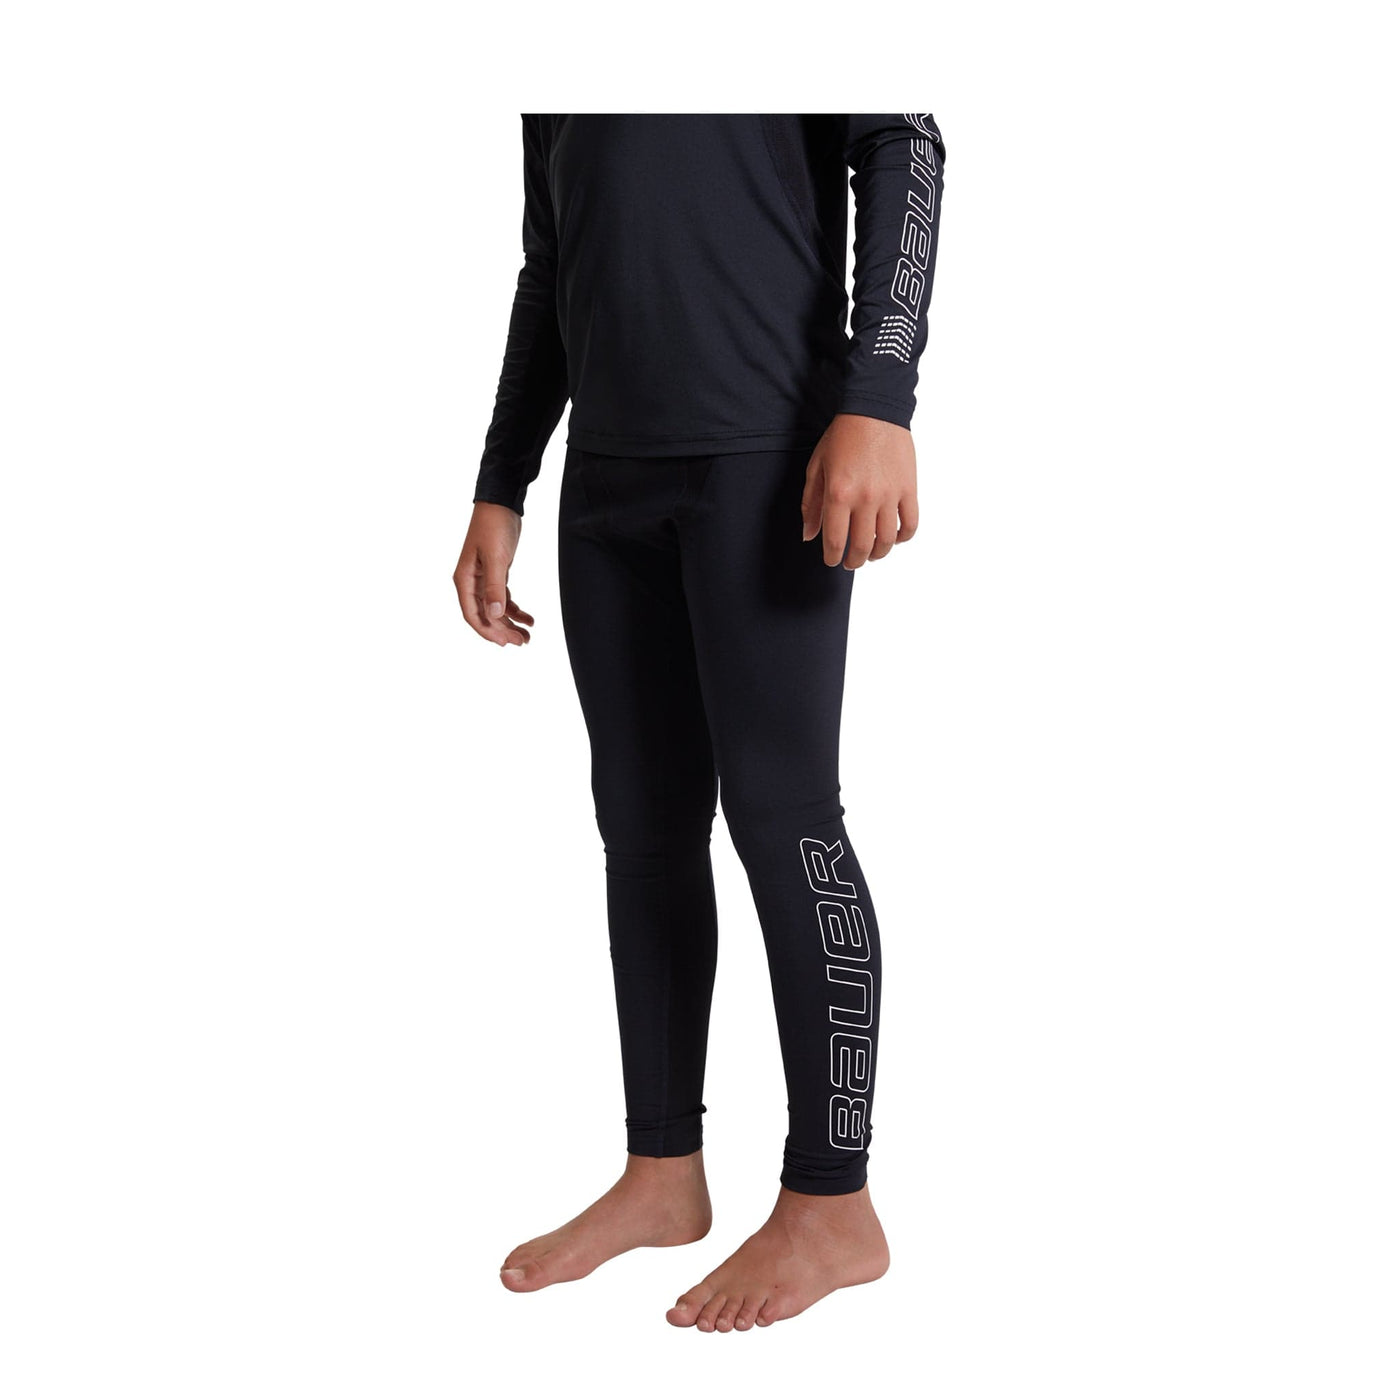 Bauer Performance Junior Baselayer Pants - The Hockey Shop Source For Sports